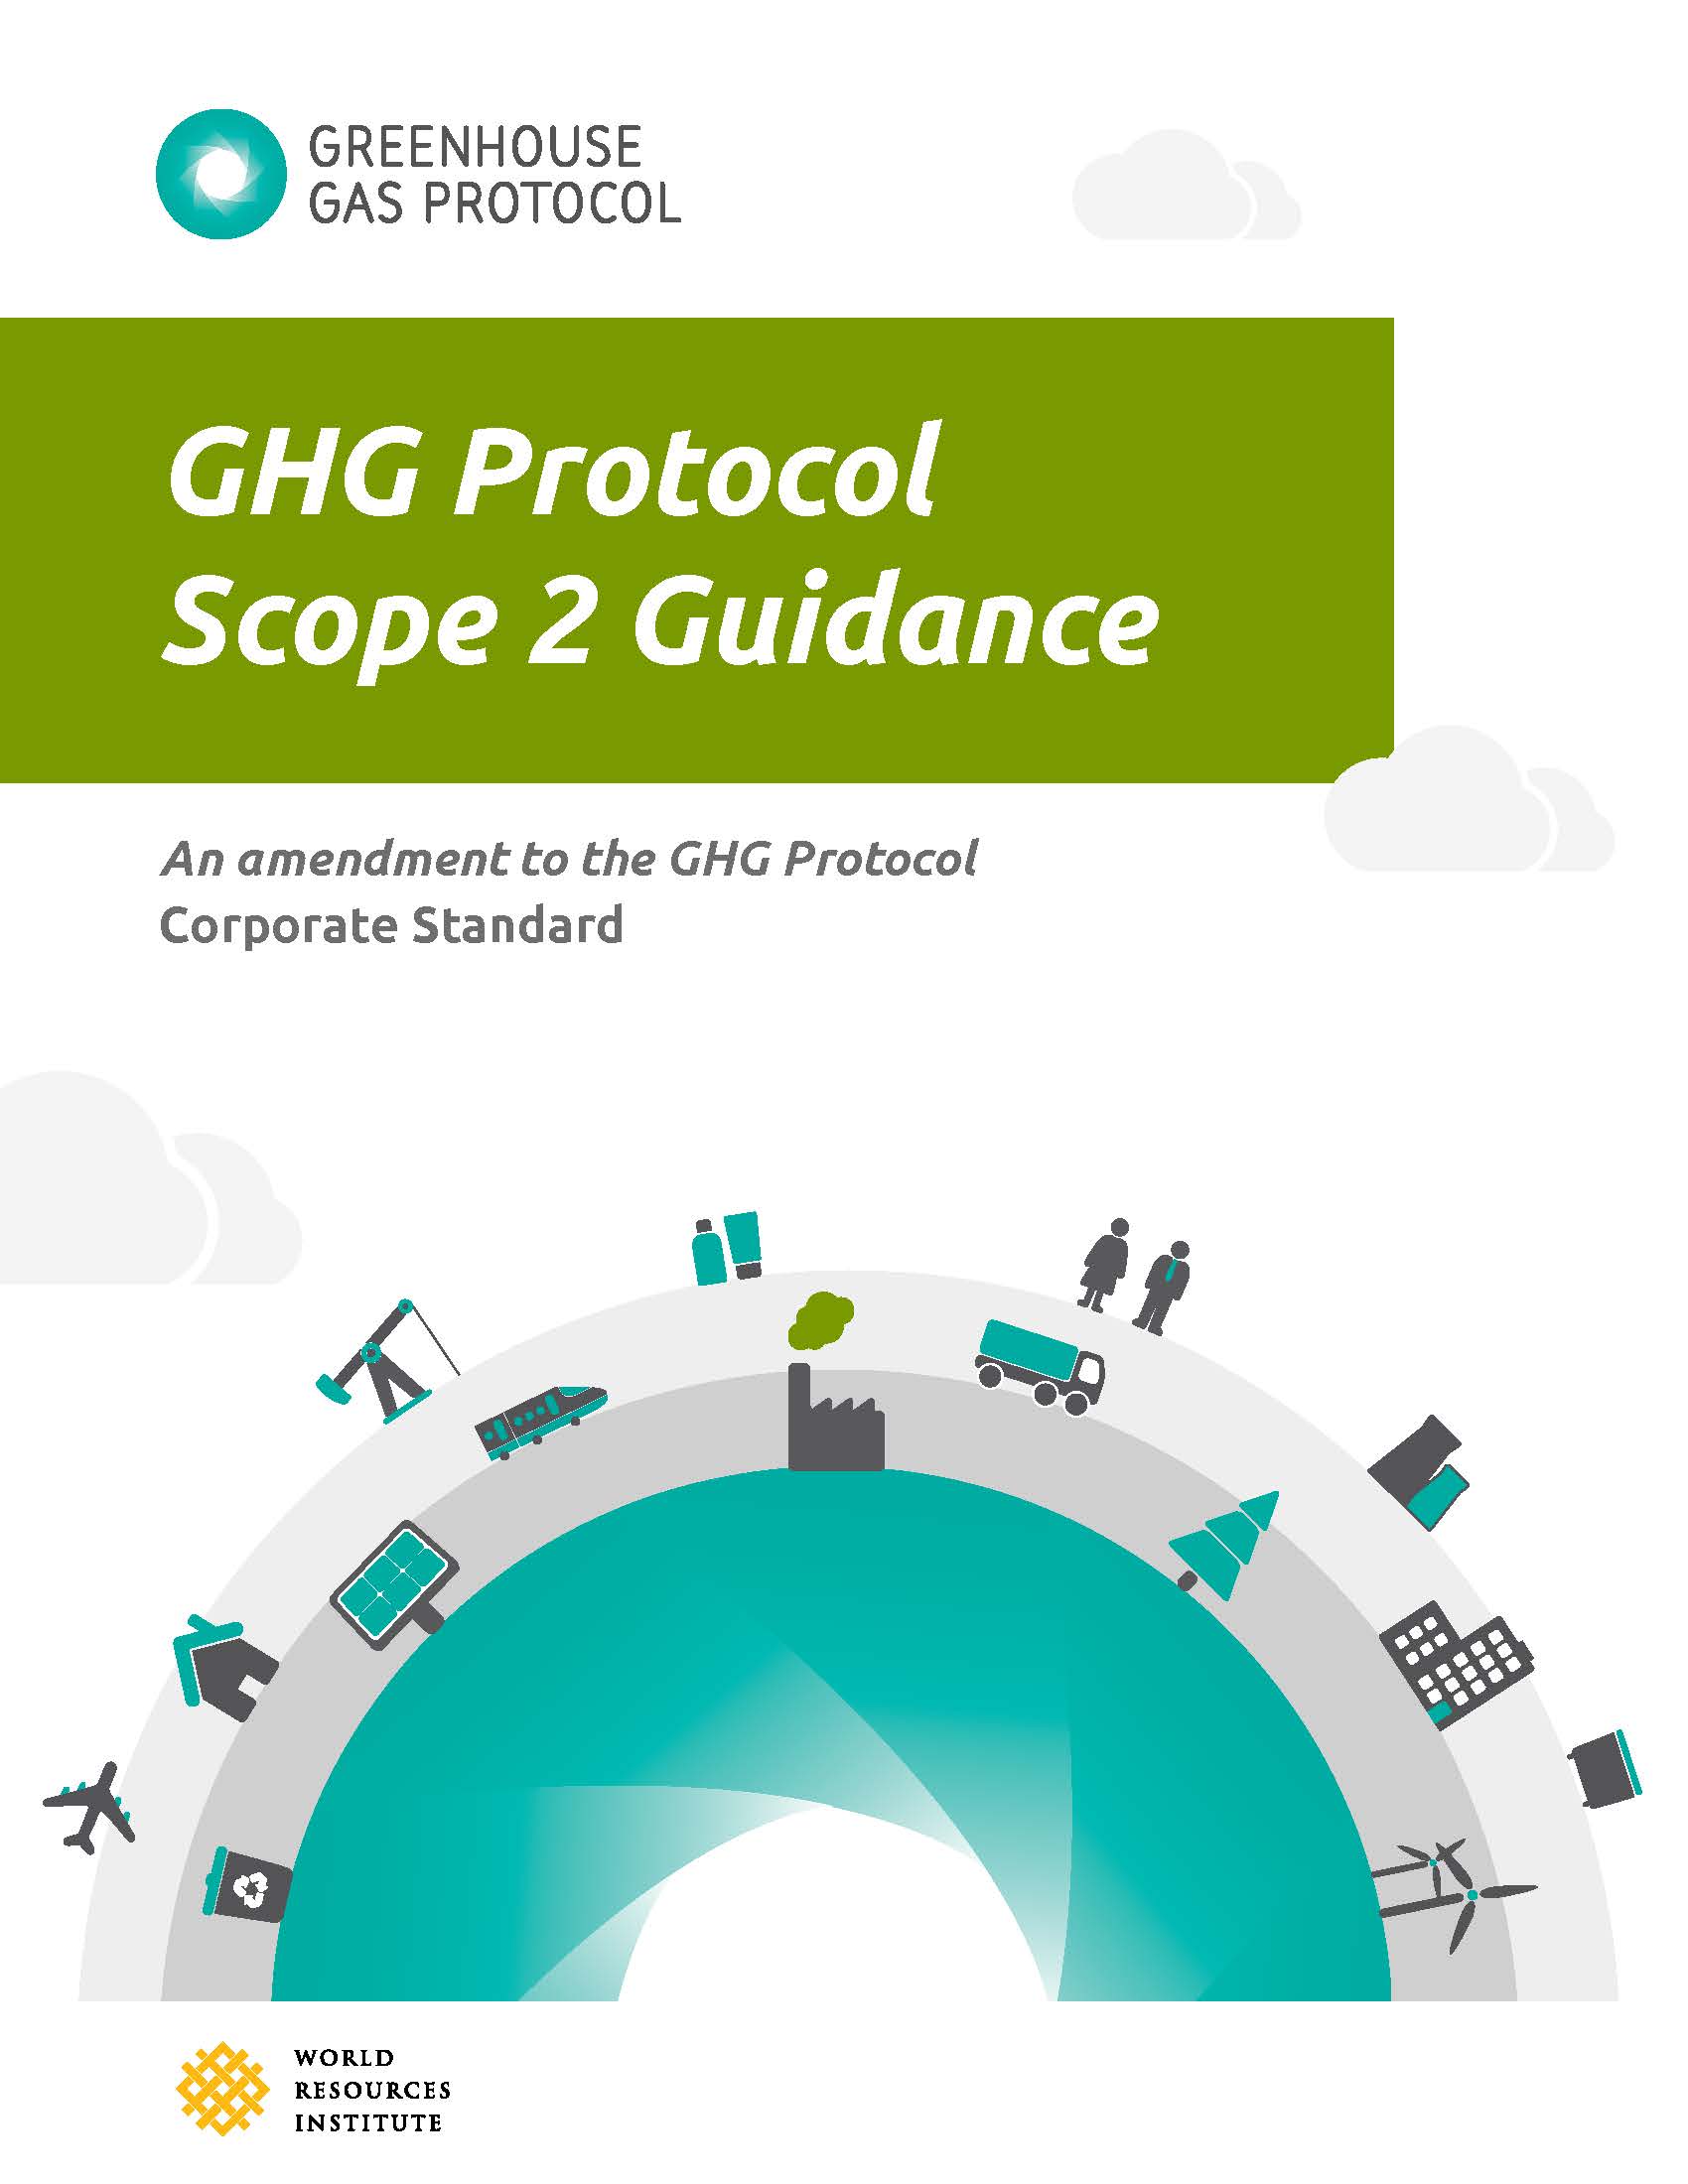 The Scope 2 Guidance standardizes how corporations measure emissions from purchased or acquired electricity, steam, heat, and cooling (called “scope 2 emissions”). 